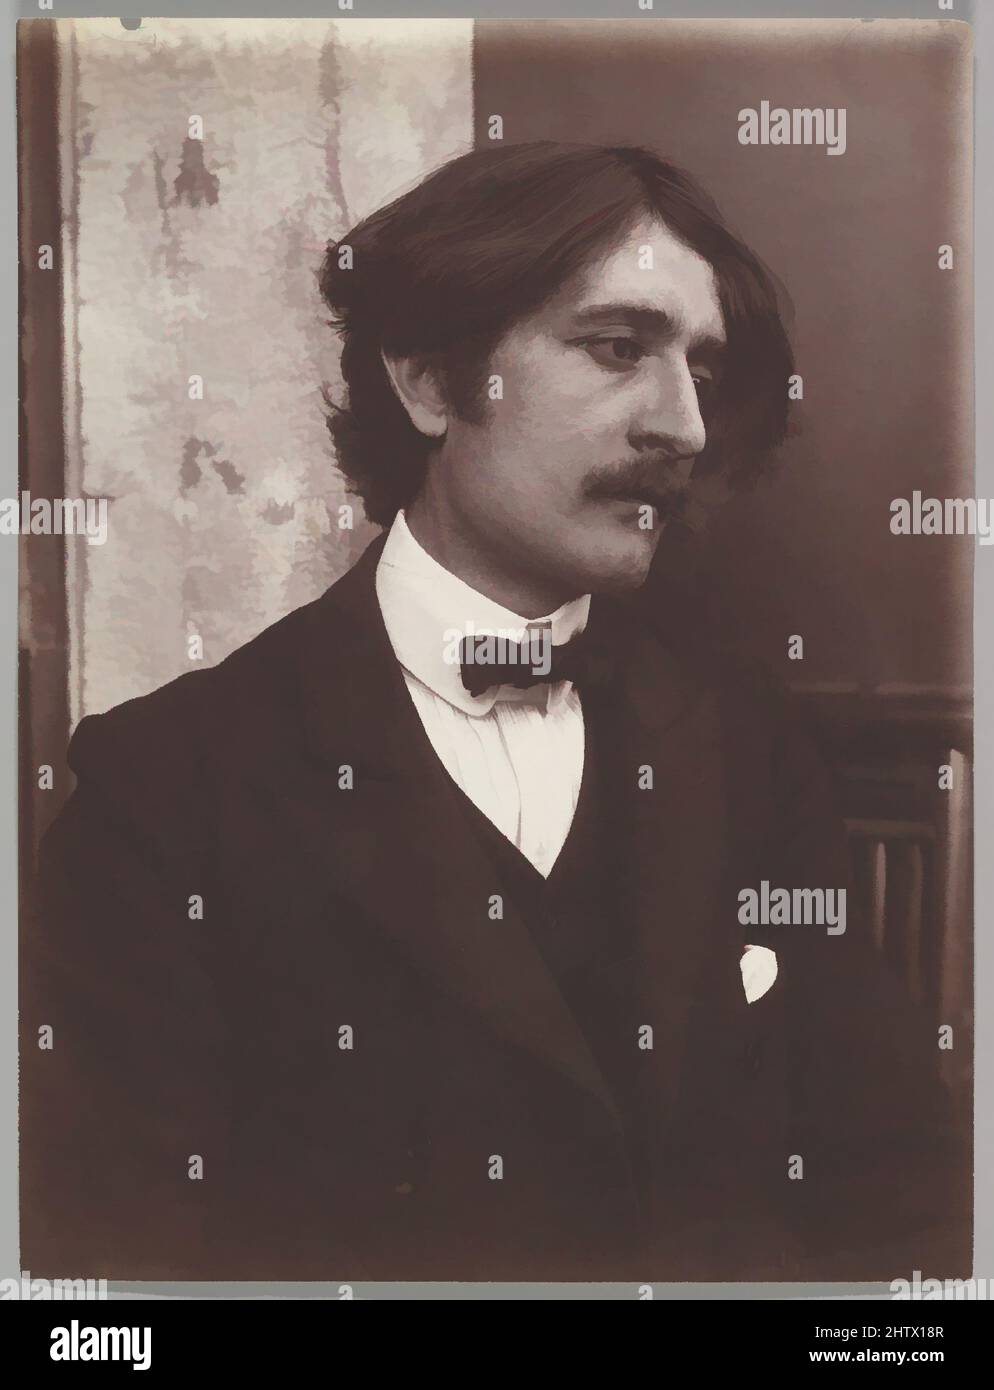 Art inspired by Man, ca. 1900, Gelatin silver print, 8 3/4 x 6 2/3, Photographs, Wilhelm von Gloeden (Italian, born Germany, 1886–1931, Classic works modernized by Artotop with a splash of modernity. Shapes, color and value, eye-catching visual impact on art. Emotions through freedom of artworks in a contemporary way. A timeless message pursuing a wildly creative new direction. Artists turning to the digital medium and creating the Artotop NFT Stock Photo